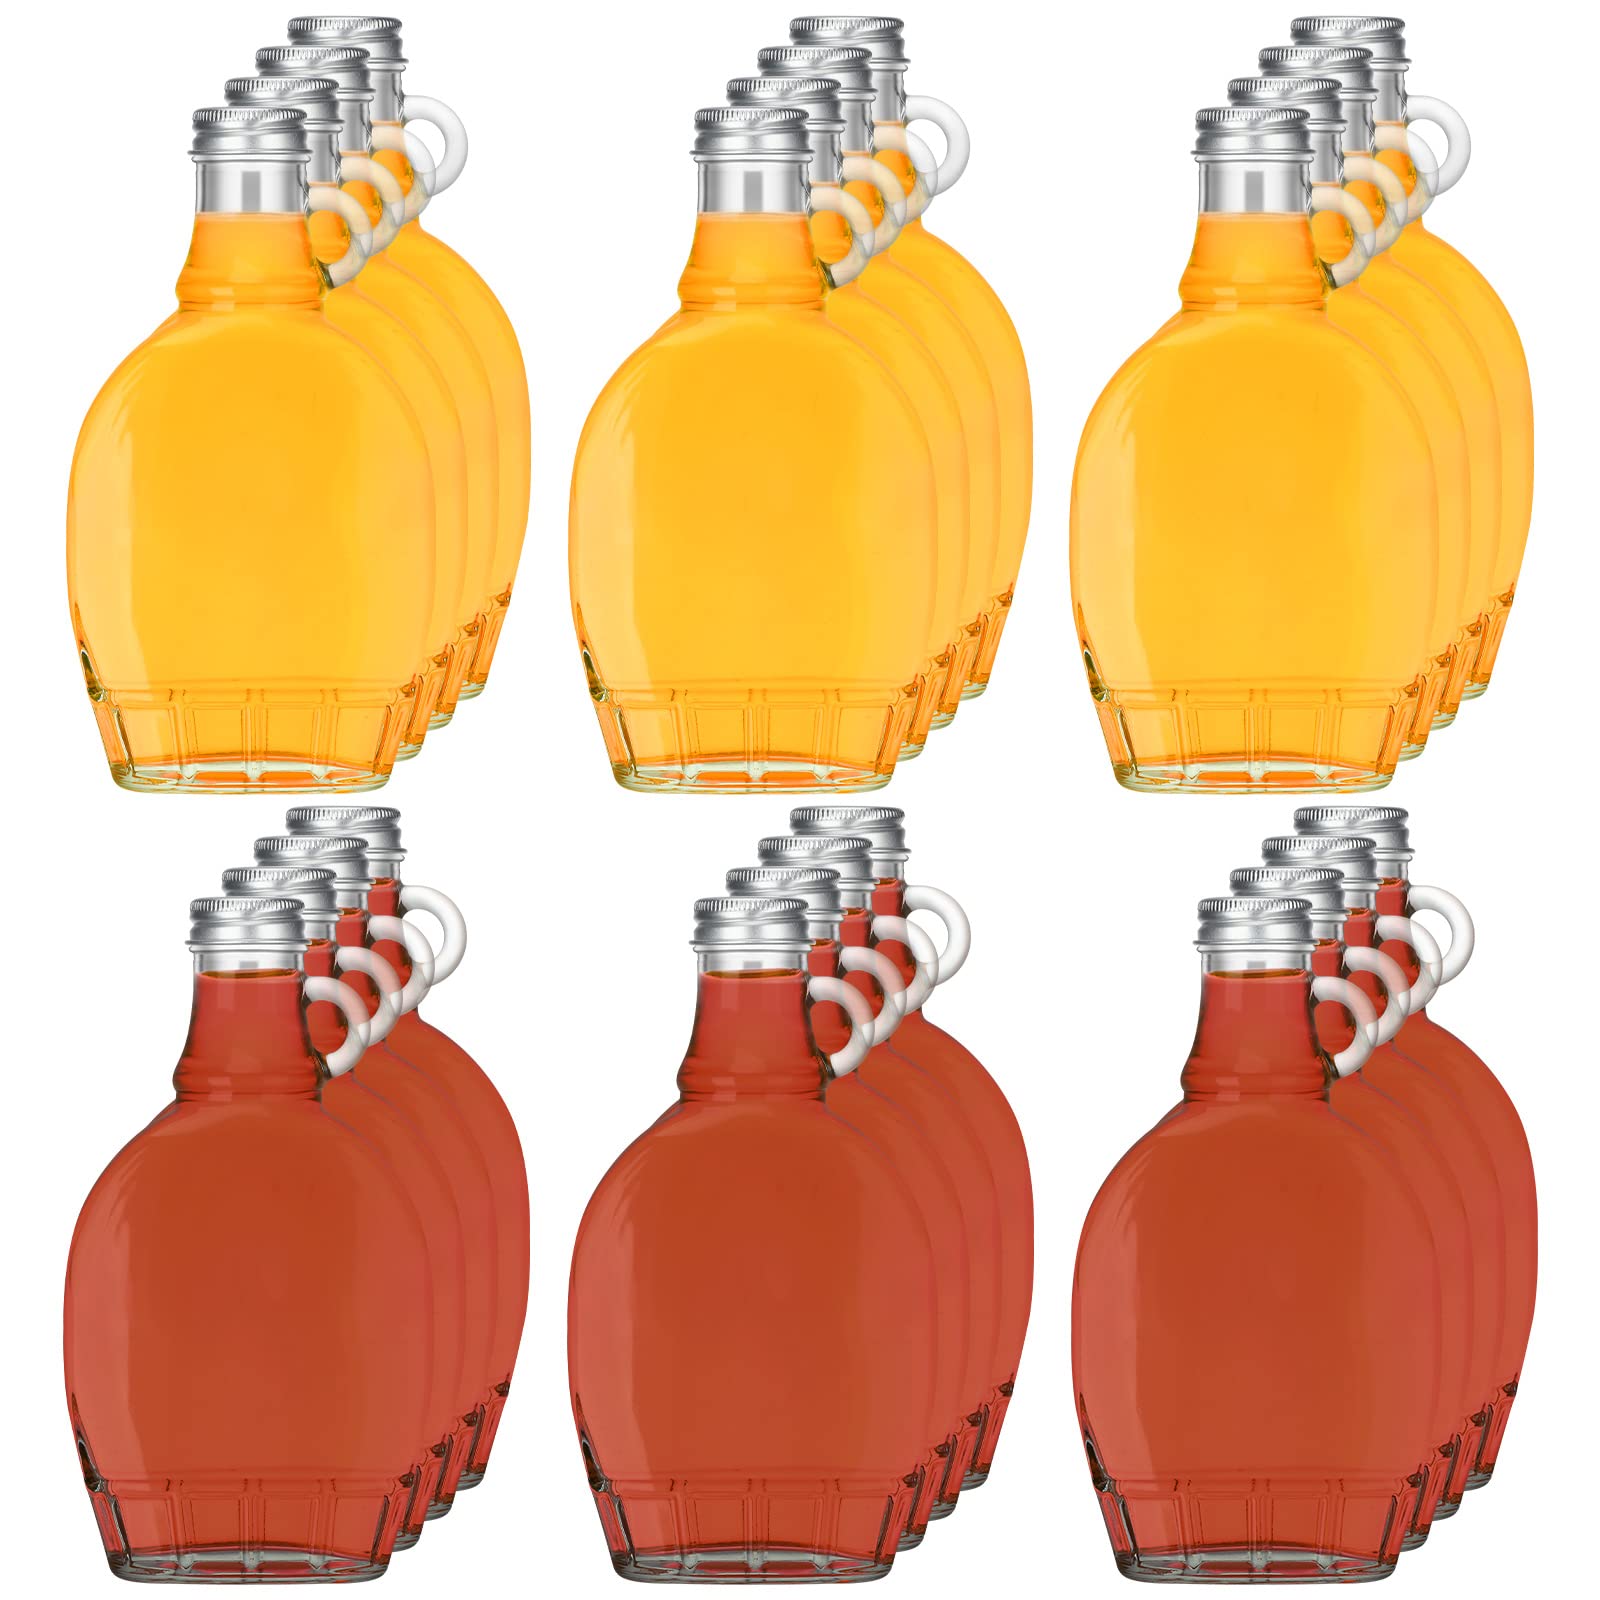 meekoo 24 Pieces 8 oz Glass Syrup Bottles with Aluminum Lid and Loop Handle Glass Maple Syrup Bottles Maple Syrup Jars Syrup Container with 4 Funnels for Potion Juice Milk Storage Gift Sauce Oil